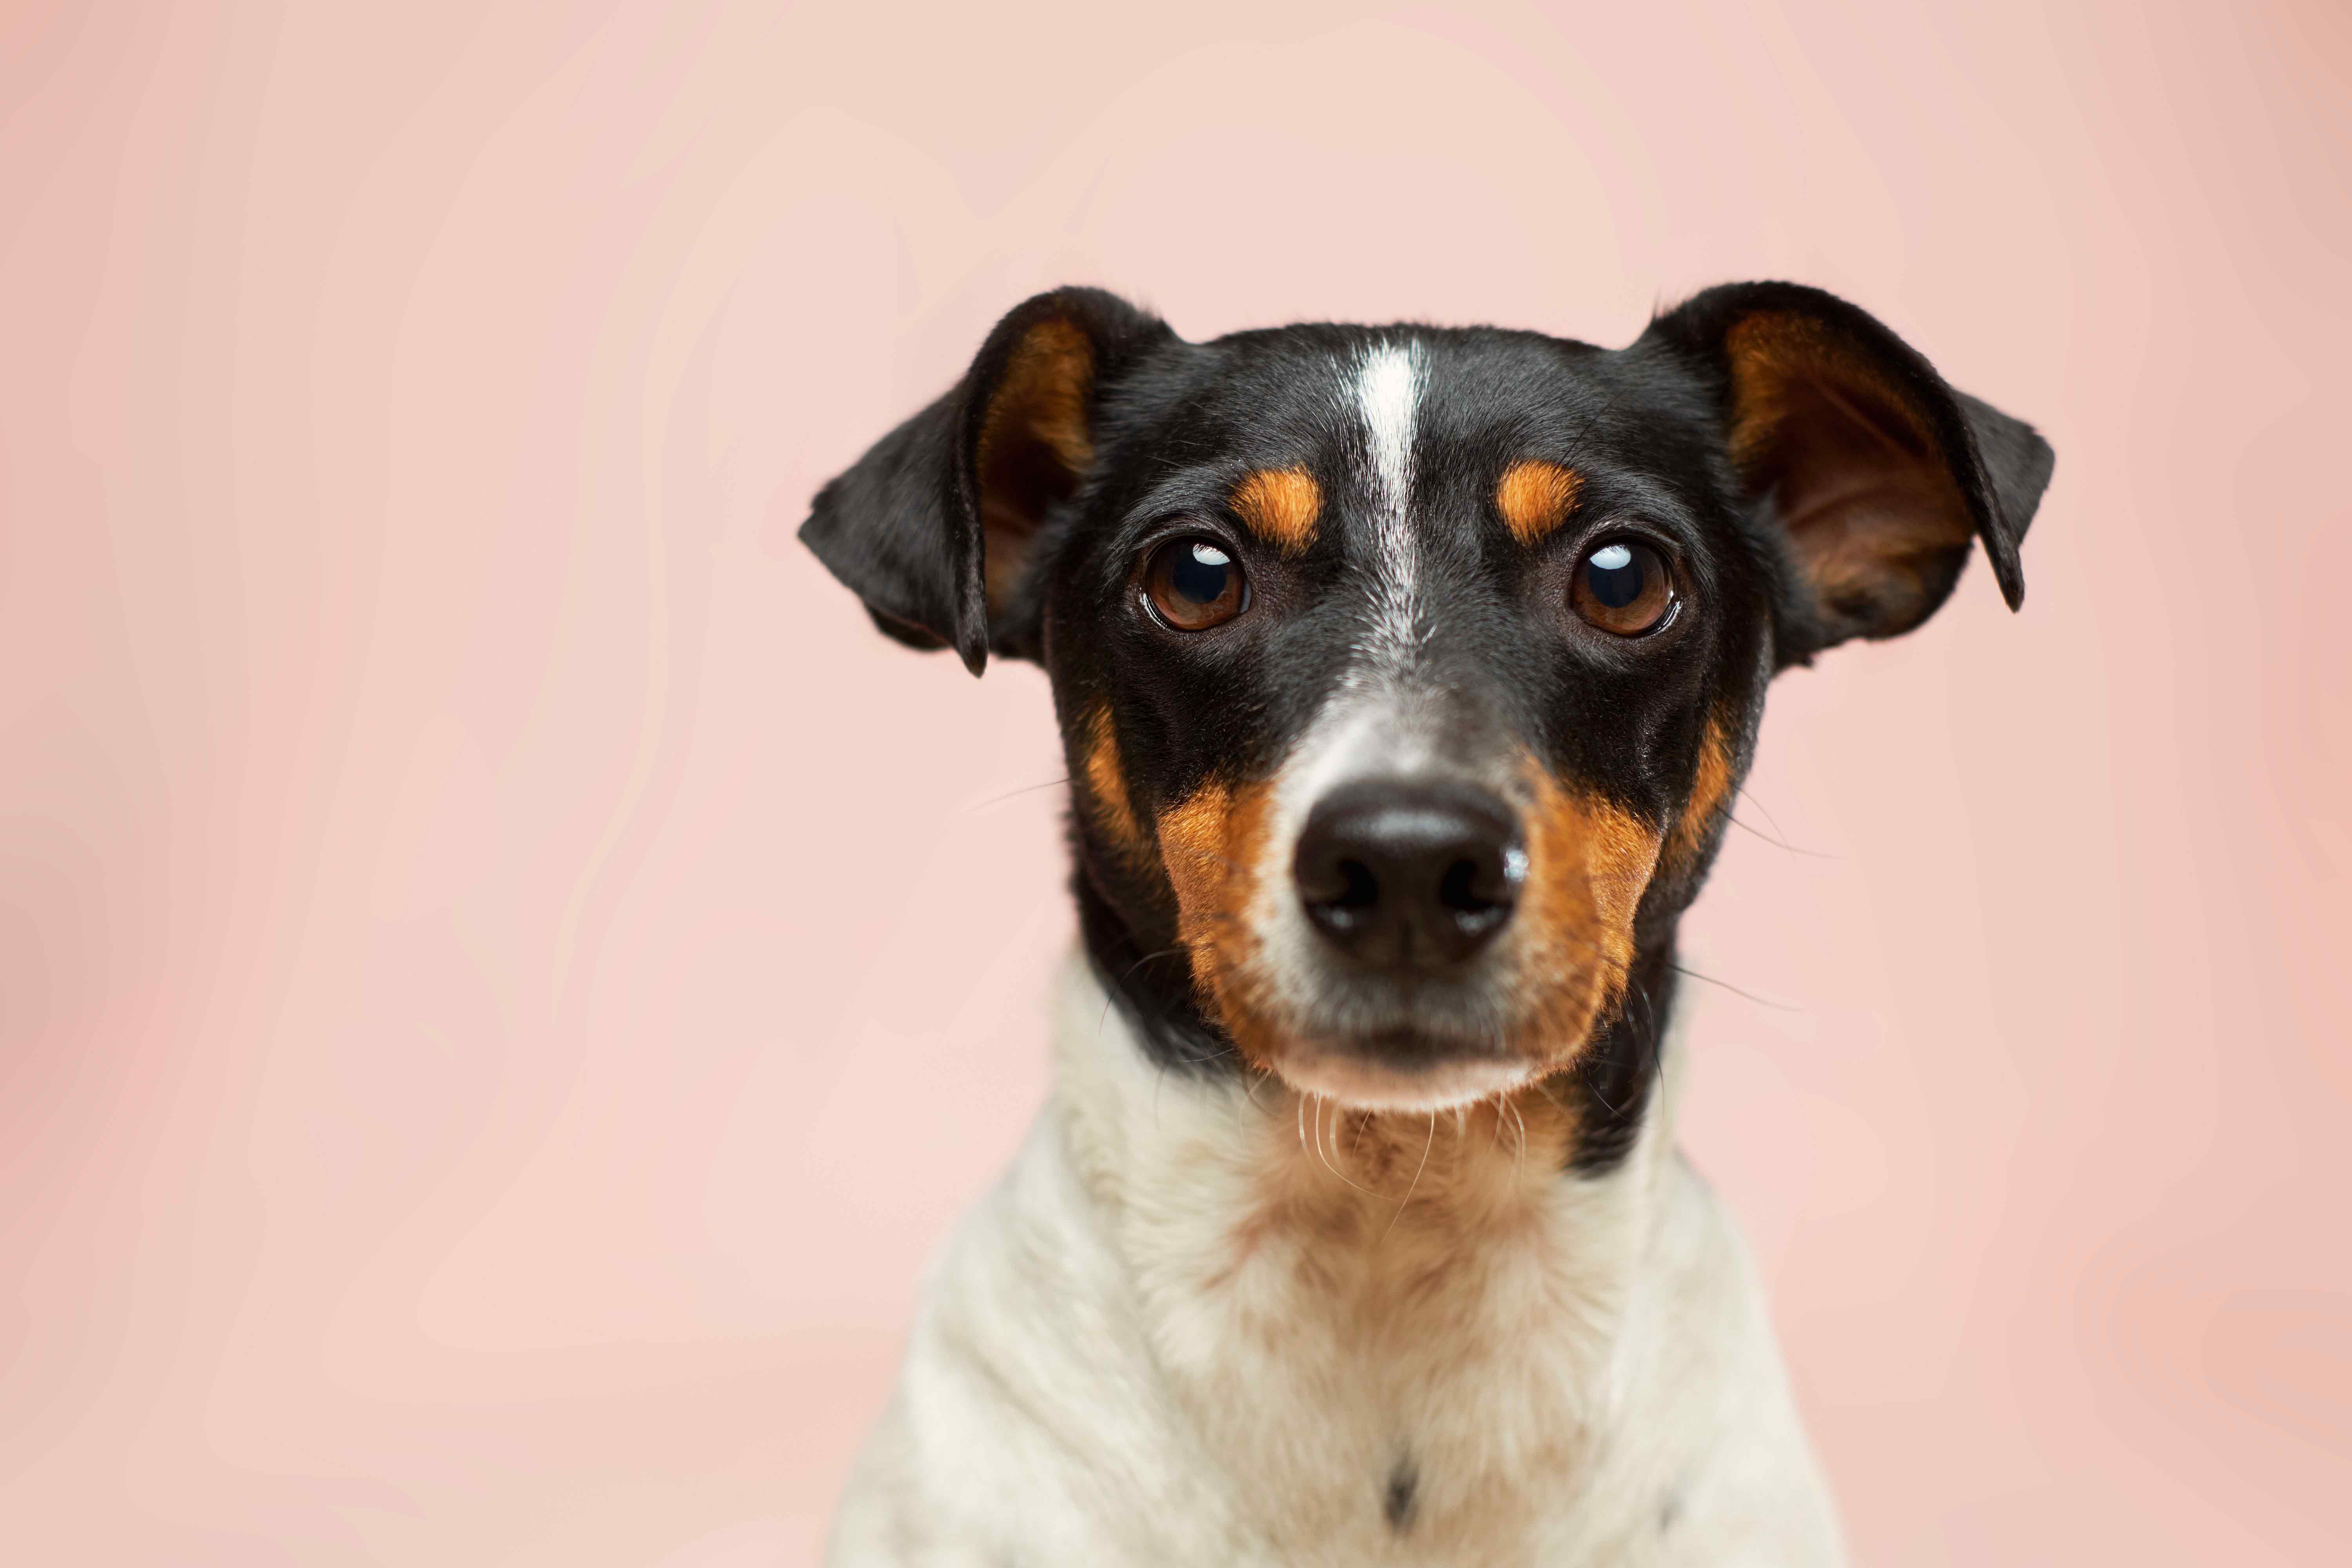 Picture of a pup looking into the camera on a pink background